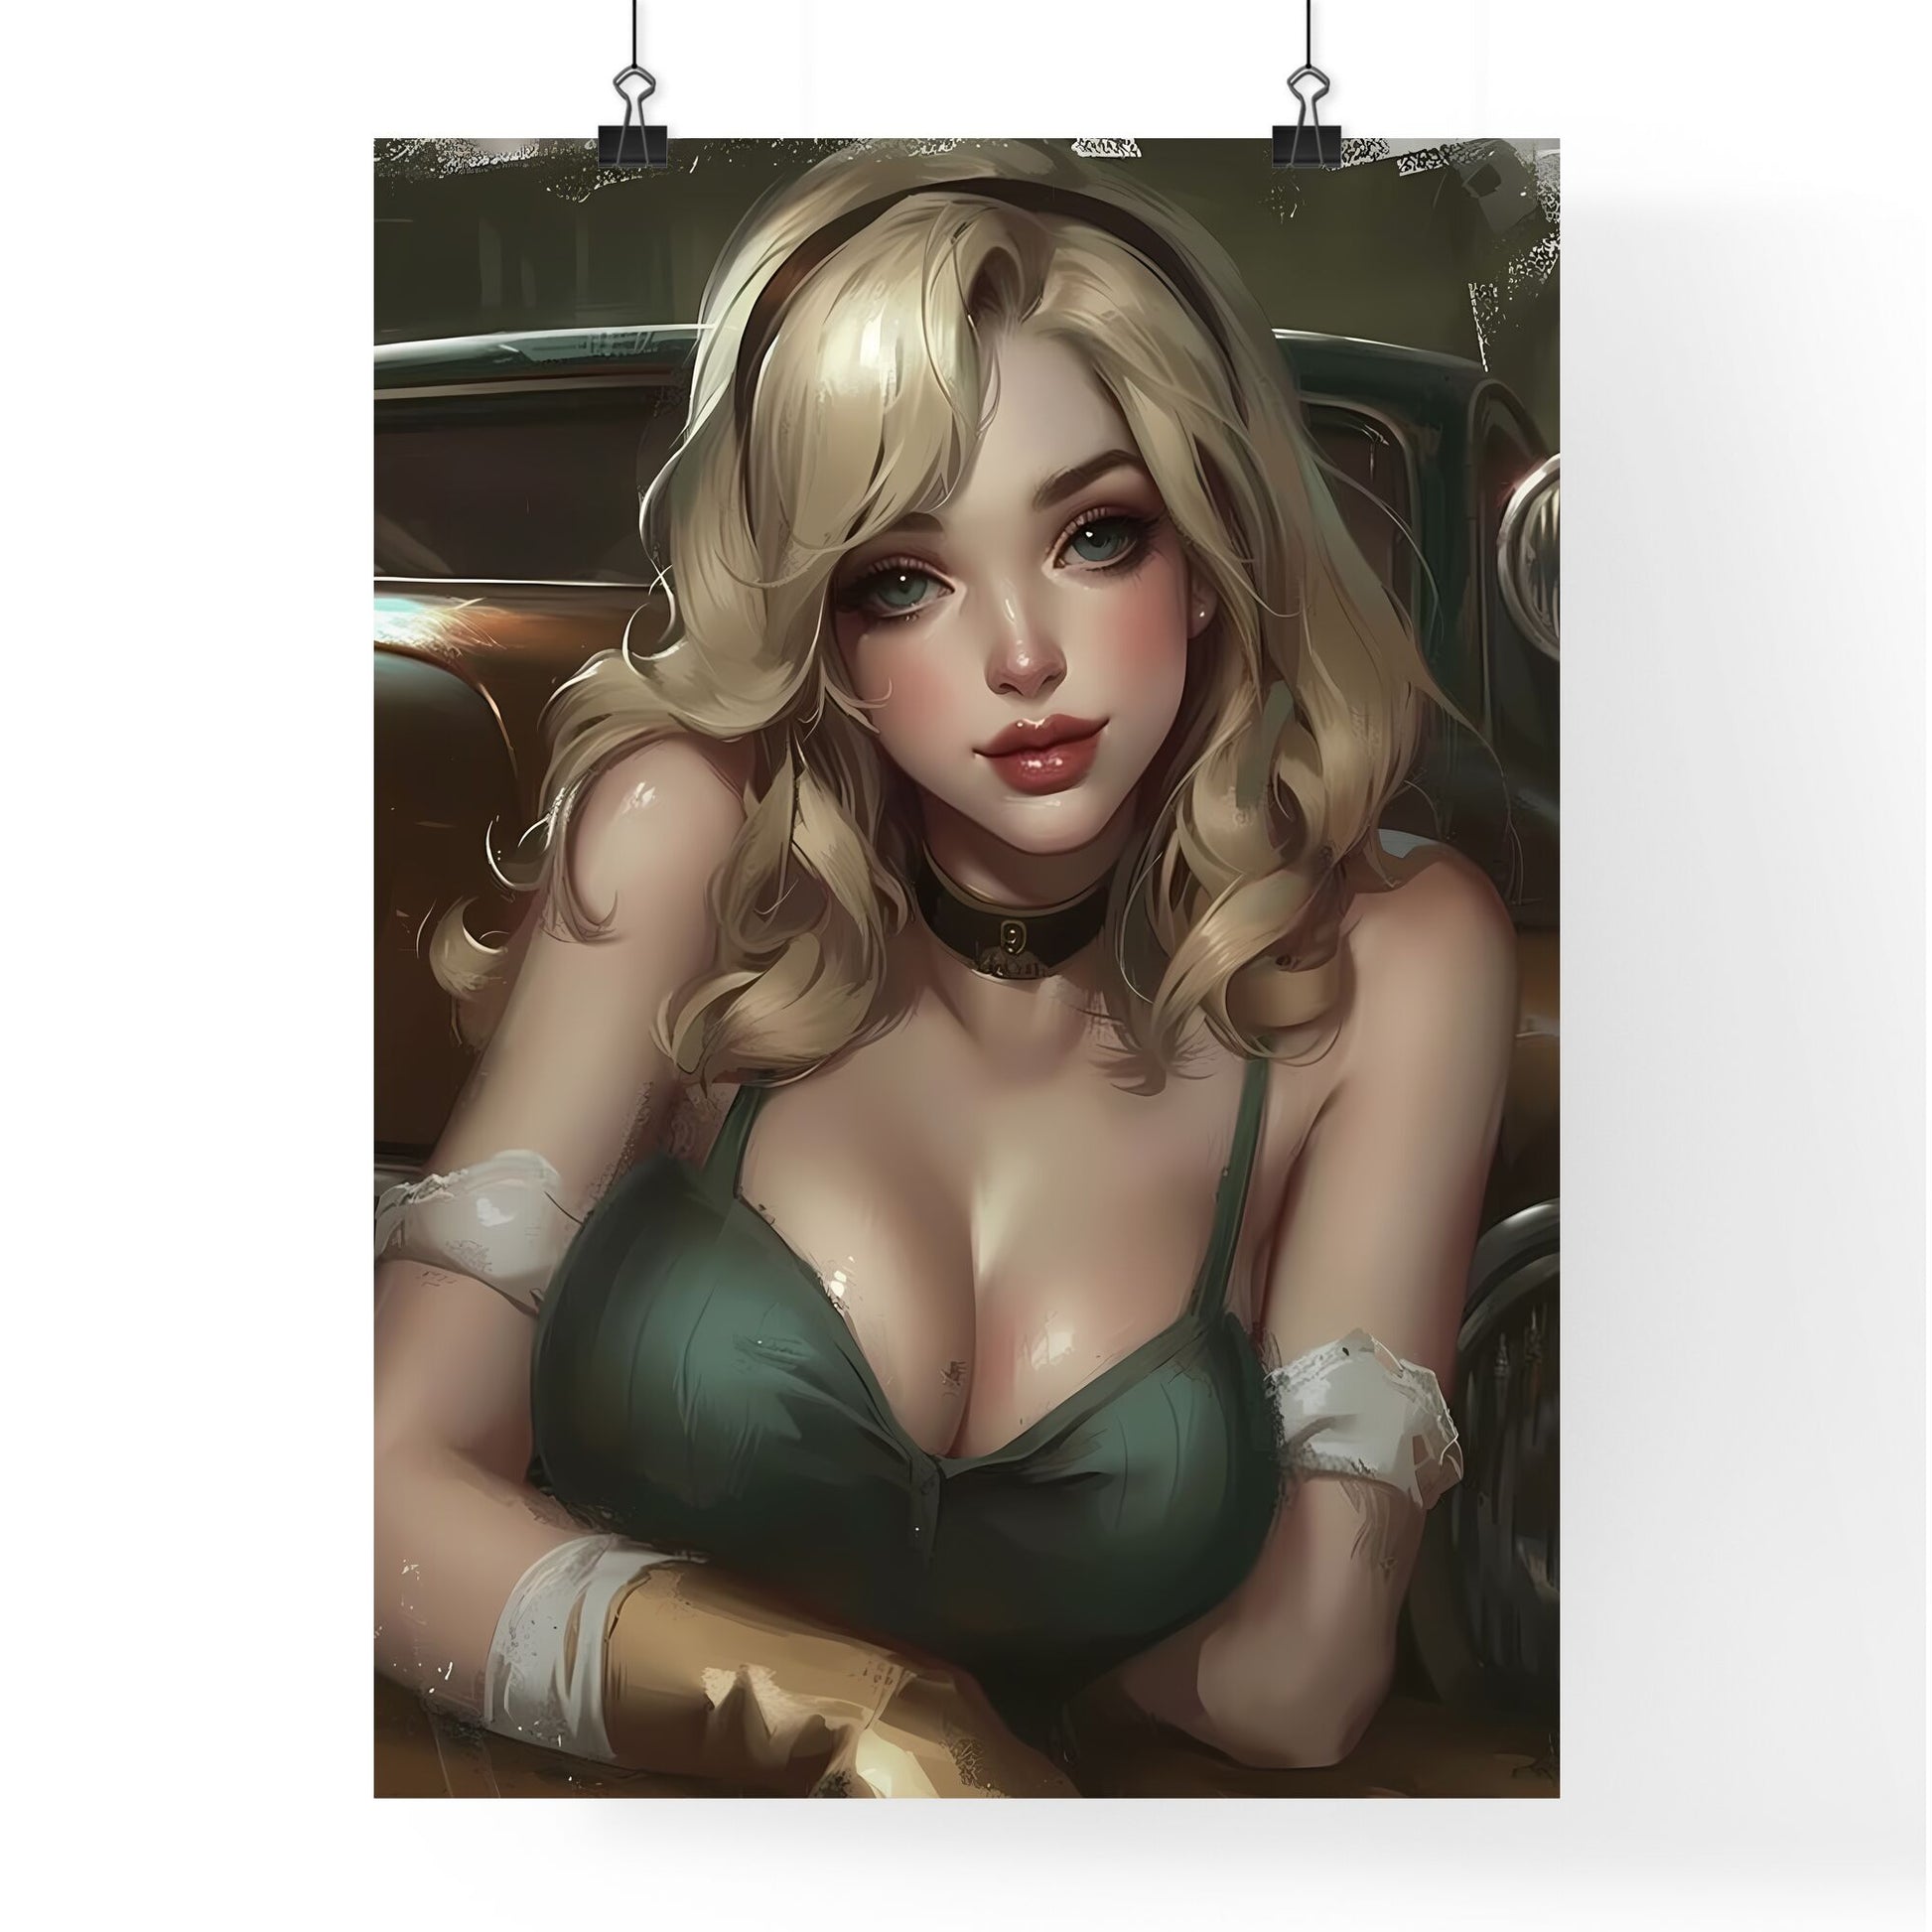 The vintage pin up girl leaning on a car - Art print of a woman posing for a picture Default Title